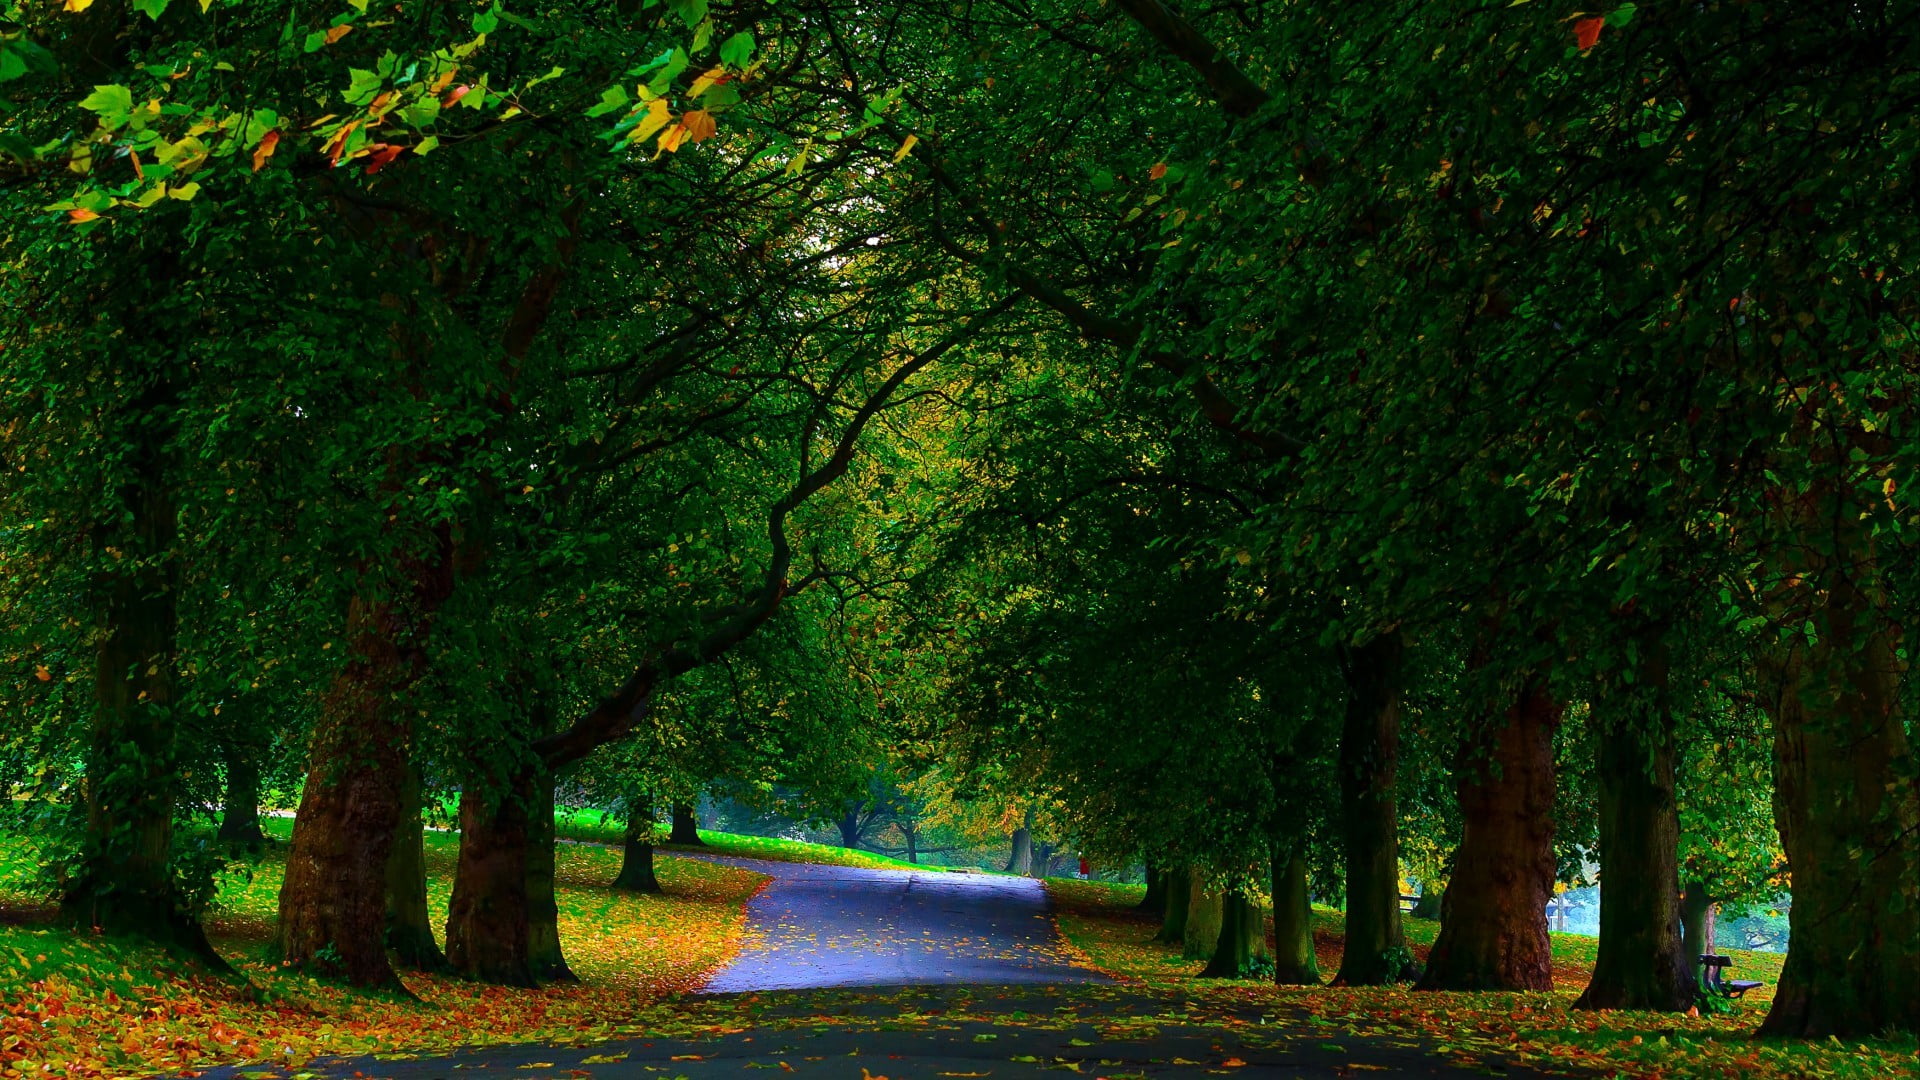 black road and trees, green leaf trees beside gray road, nature